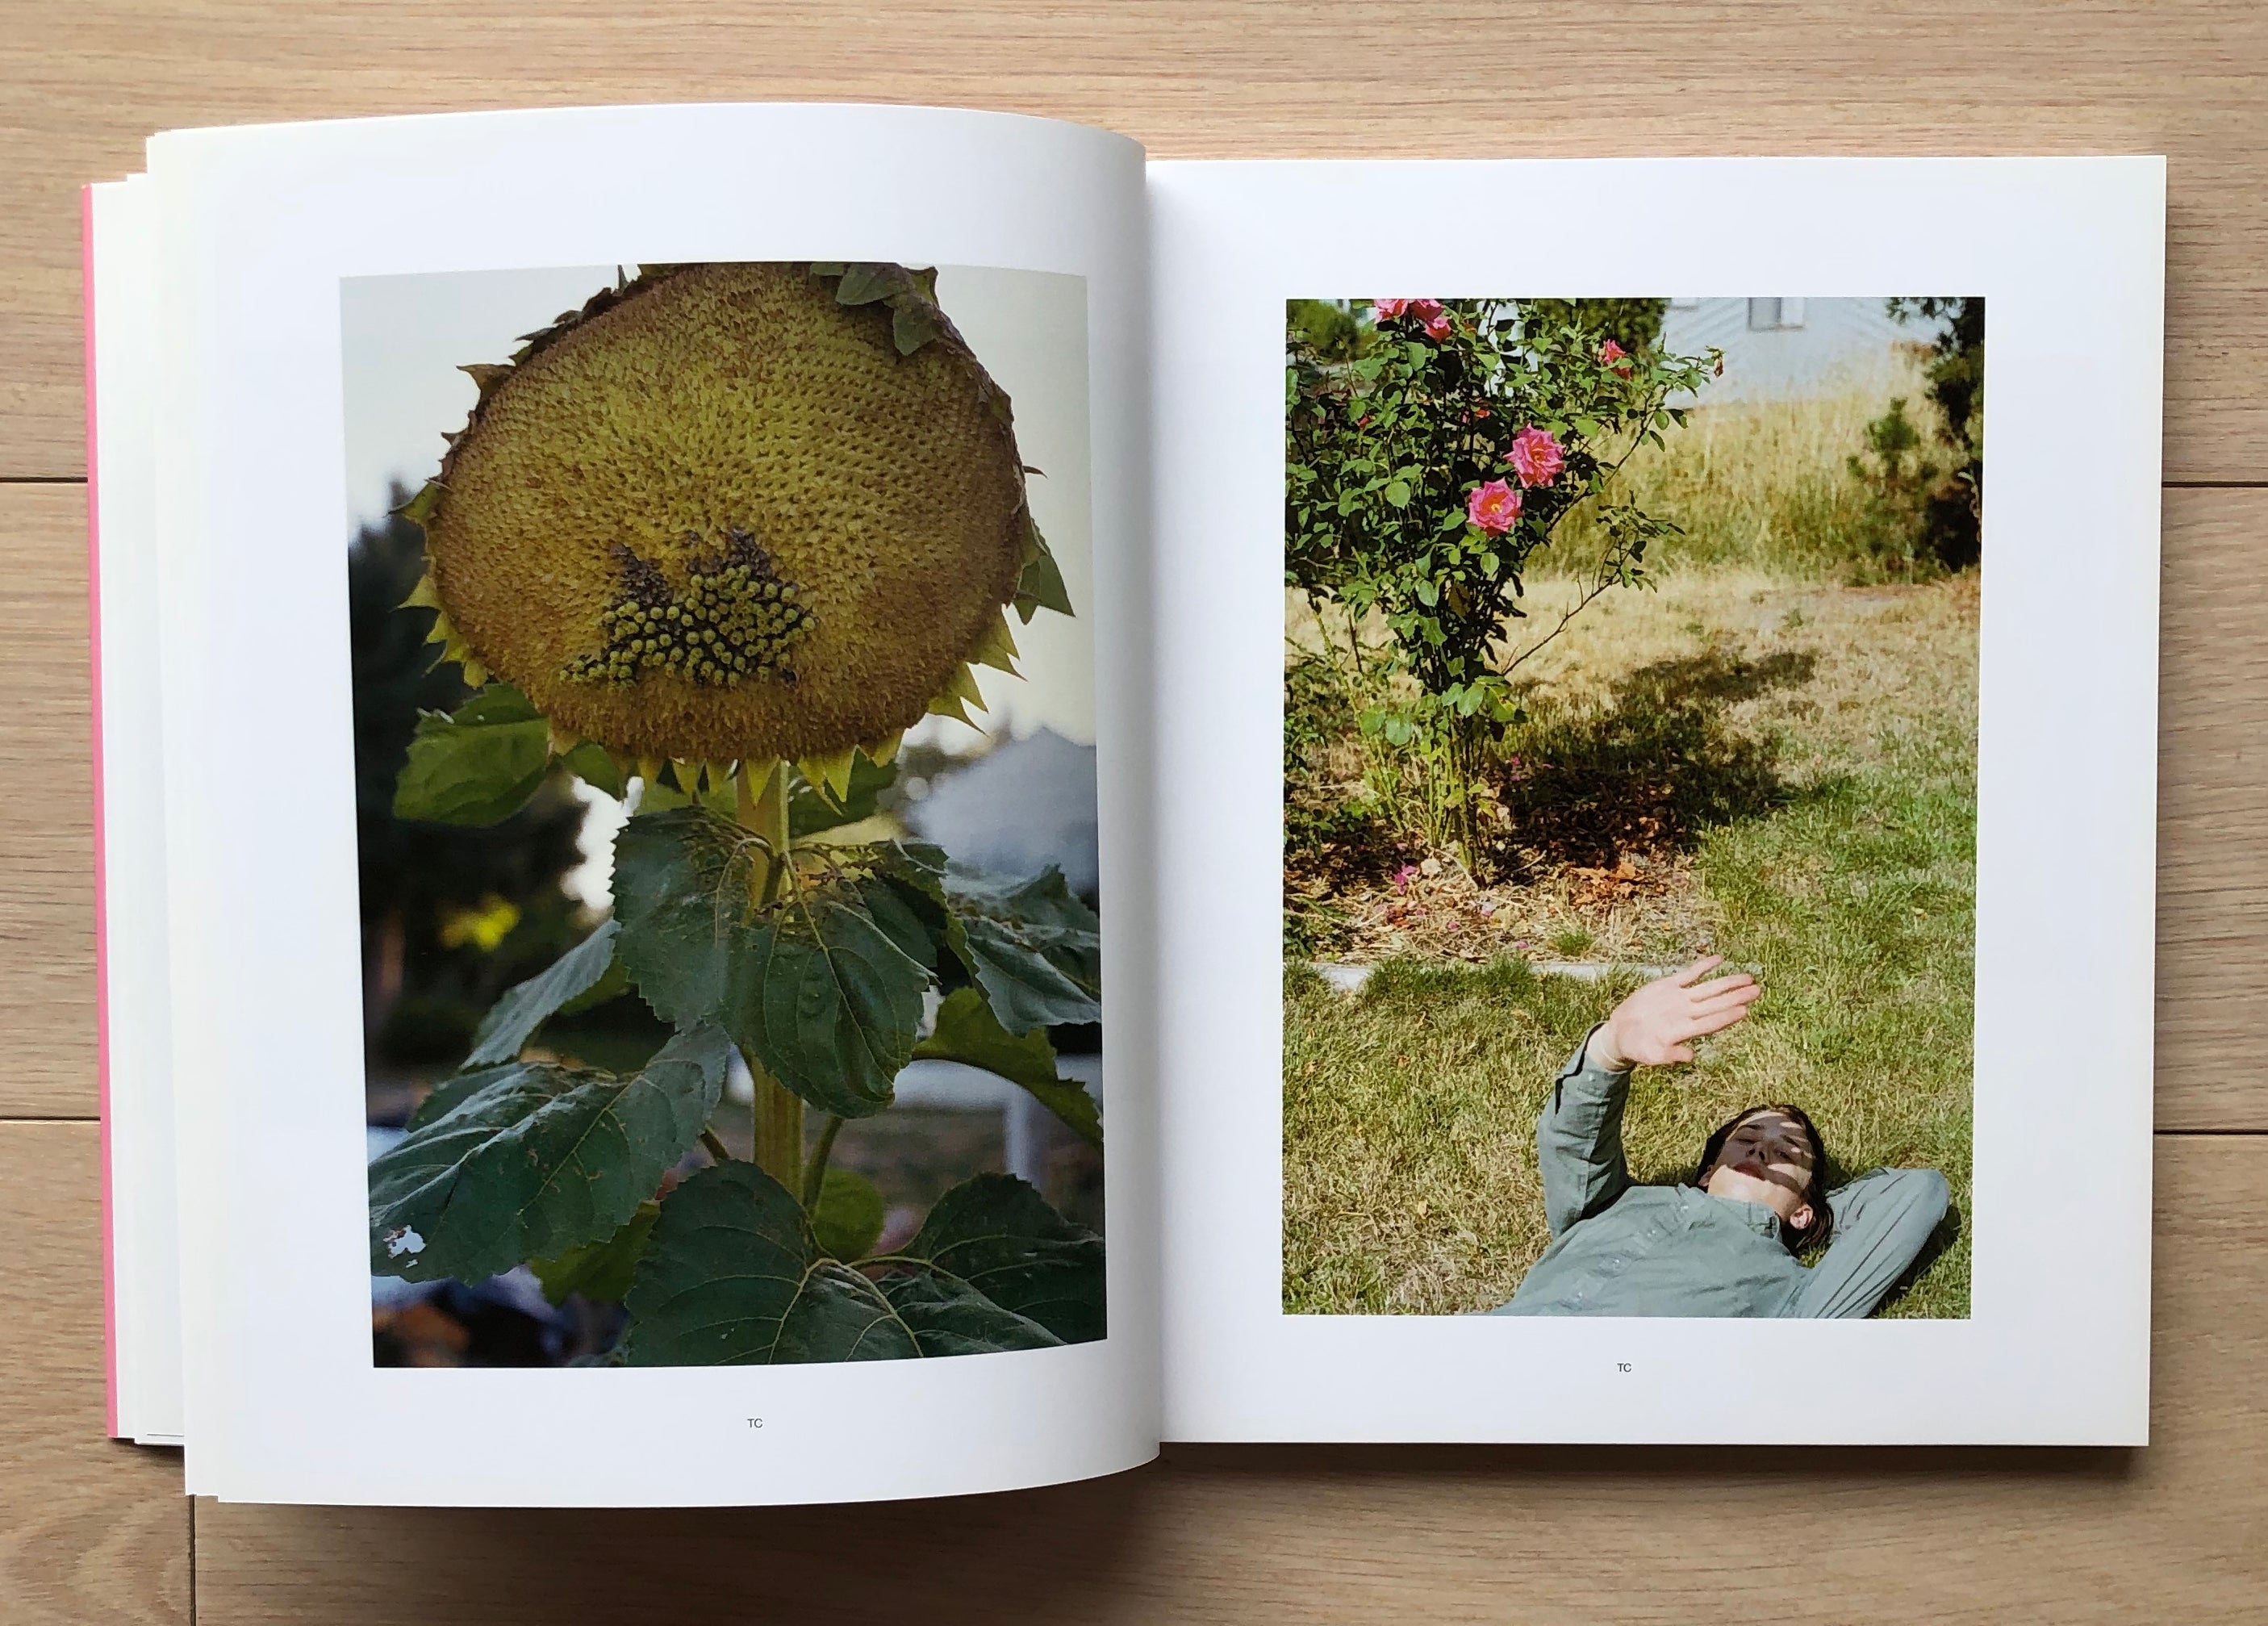 Thumbsucker, Photography From The Film By Mike Mills (Mark Borthwick, Todd Cole, Takashi Homma, Ryan McGinley, Ed Templeton), 2005